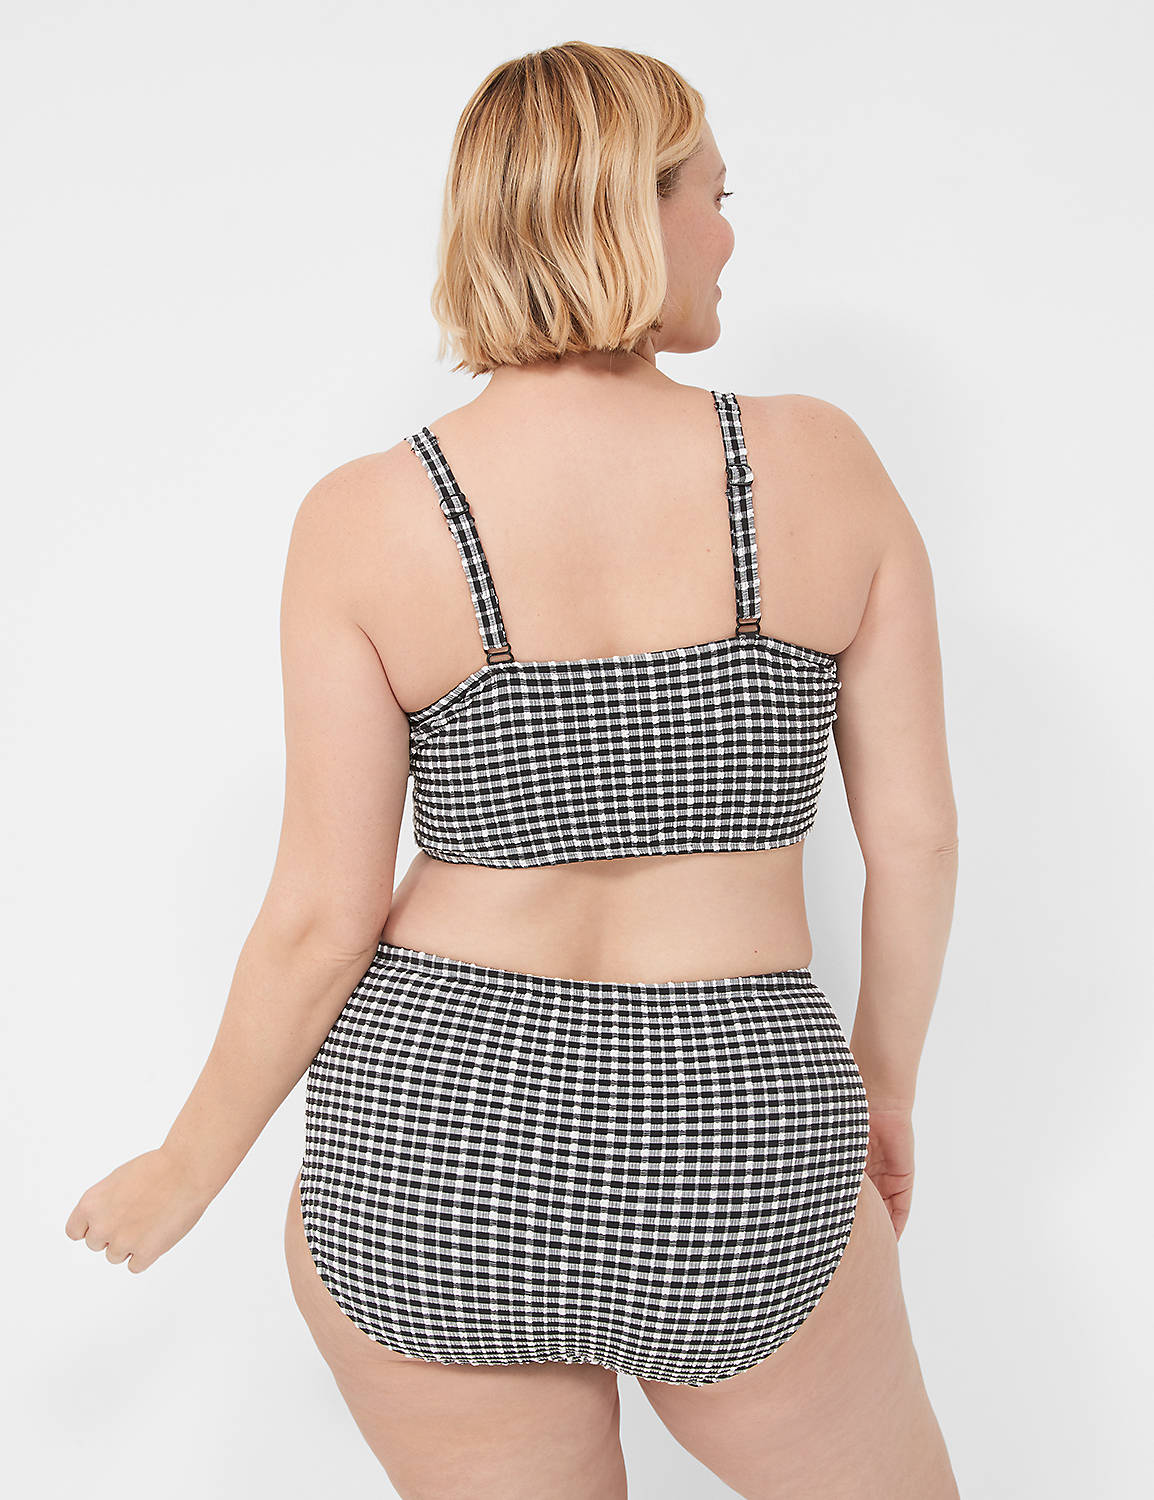 Gingham Brief 1138788 Product Image 2